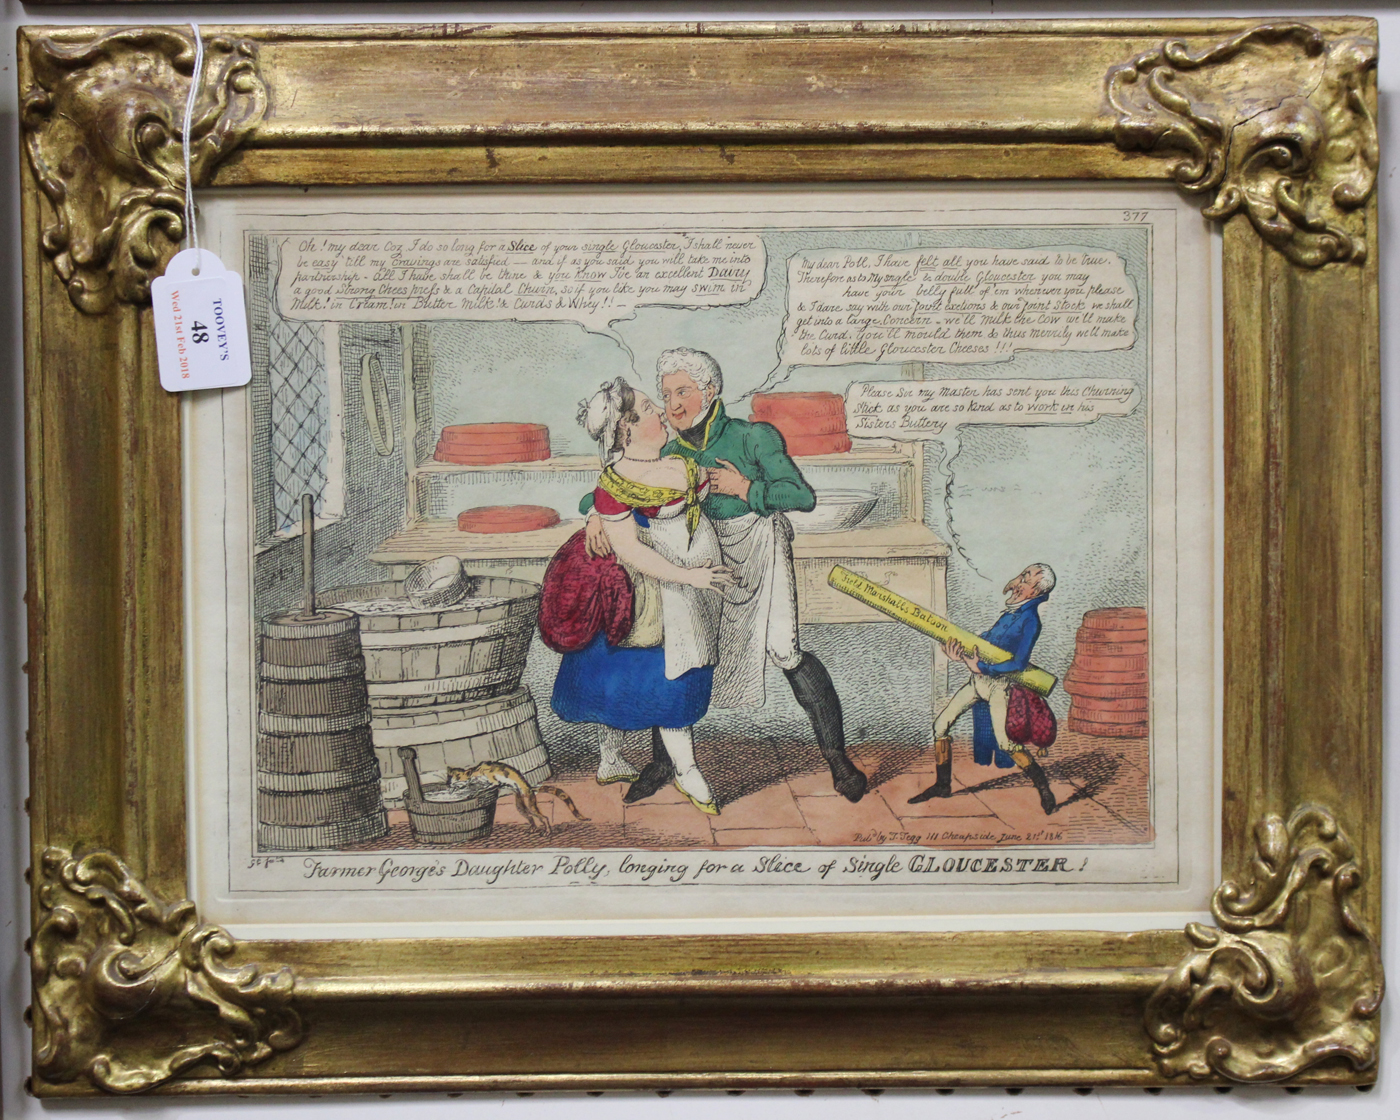 George Cruikshank - 'Farmer George's Daughter Polly, longing for a Slice of Single Gloucester!',